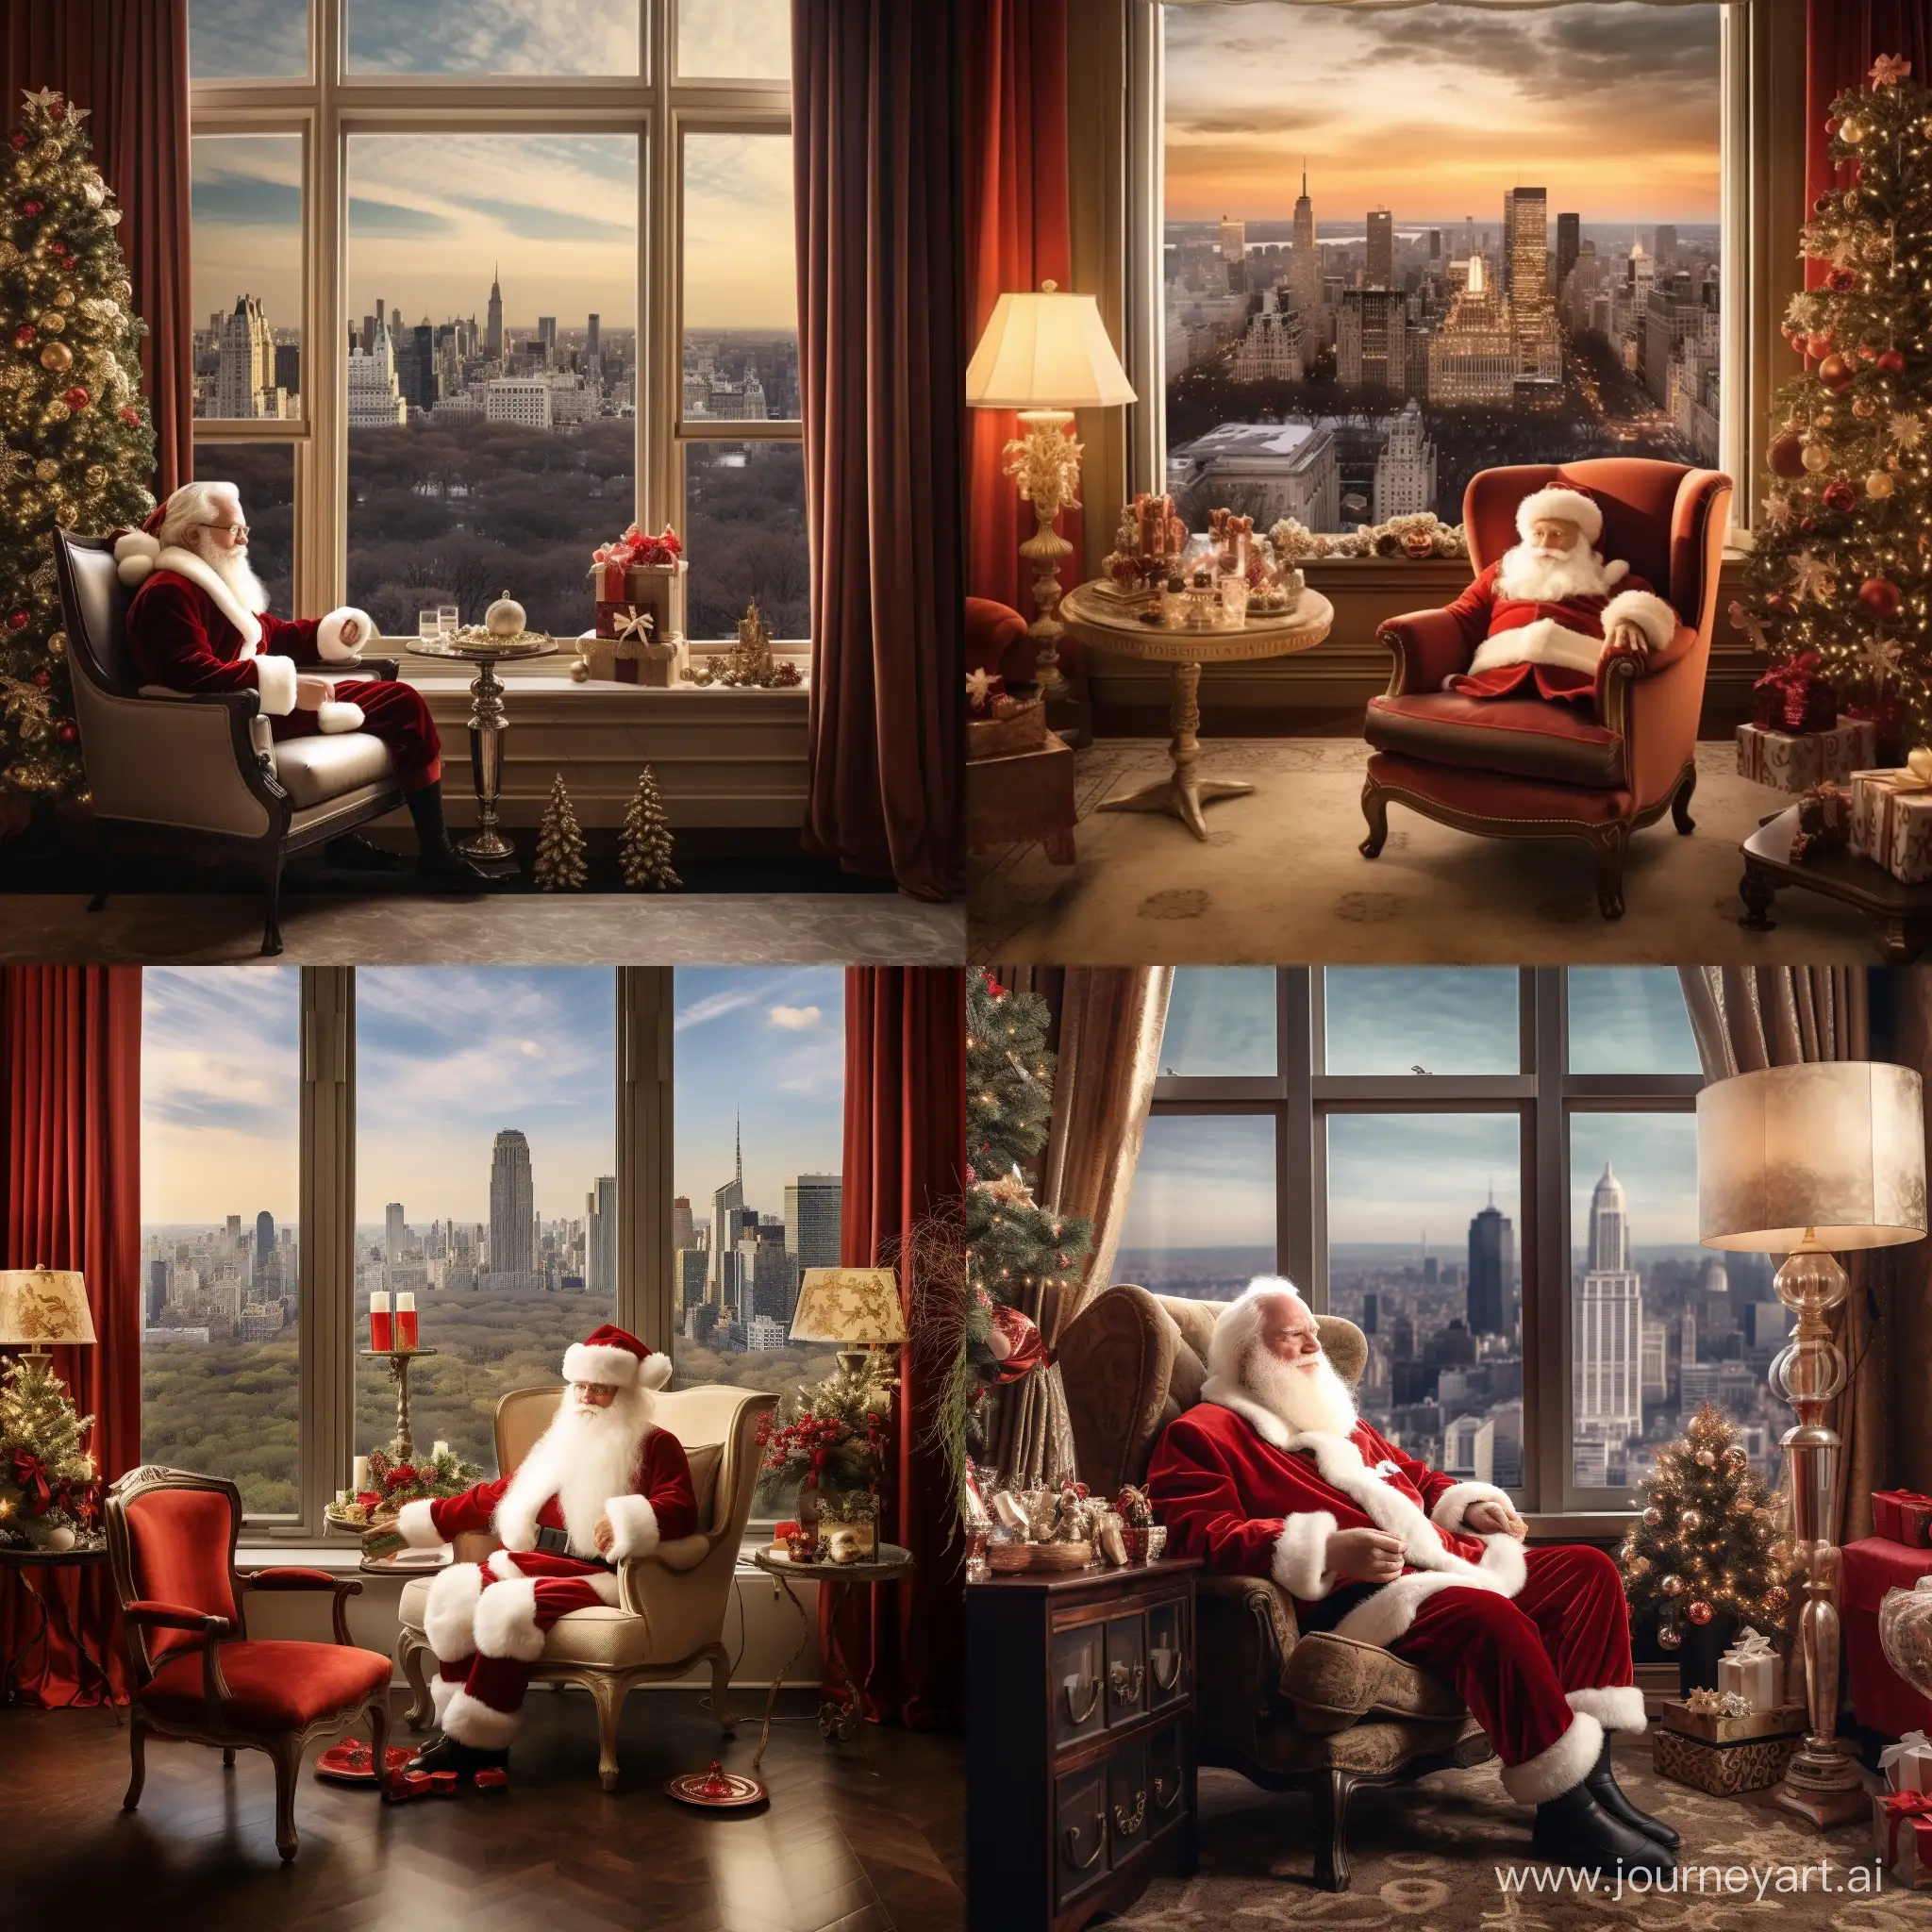 Santa-Claus-Relaxing-by-Central-Park-Fireplace-View